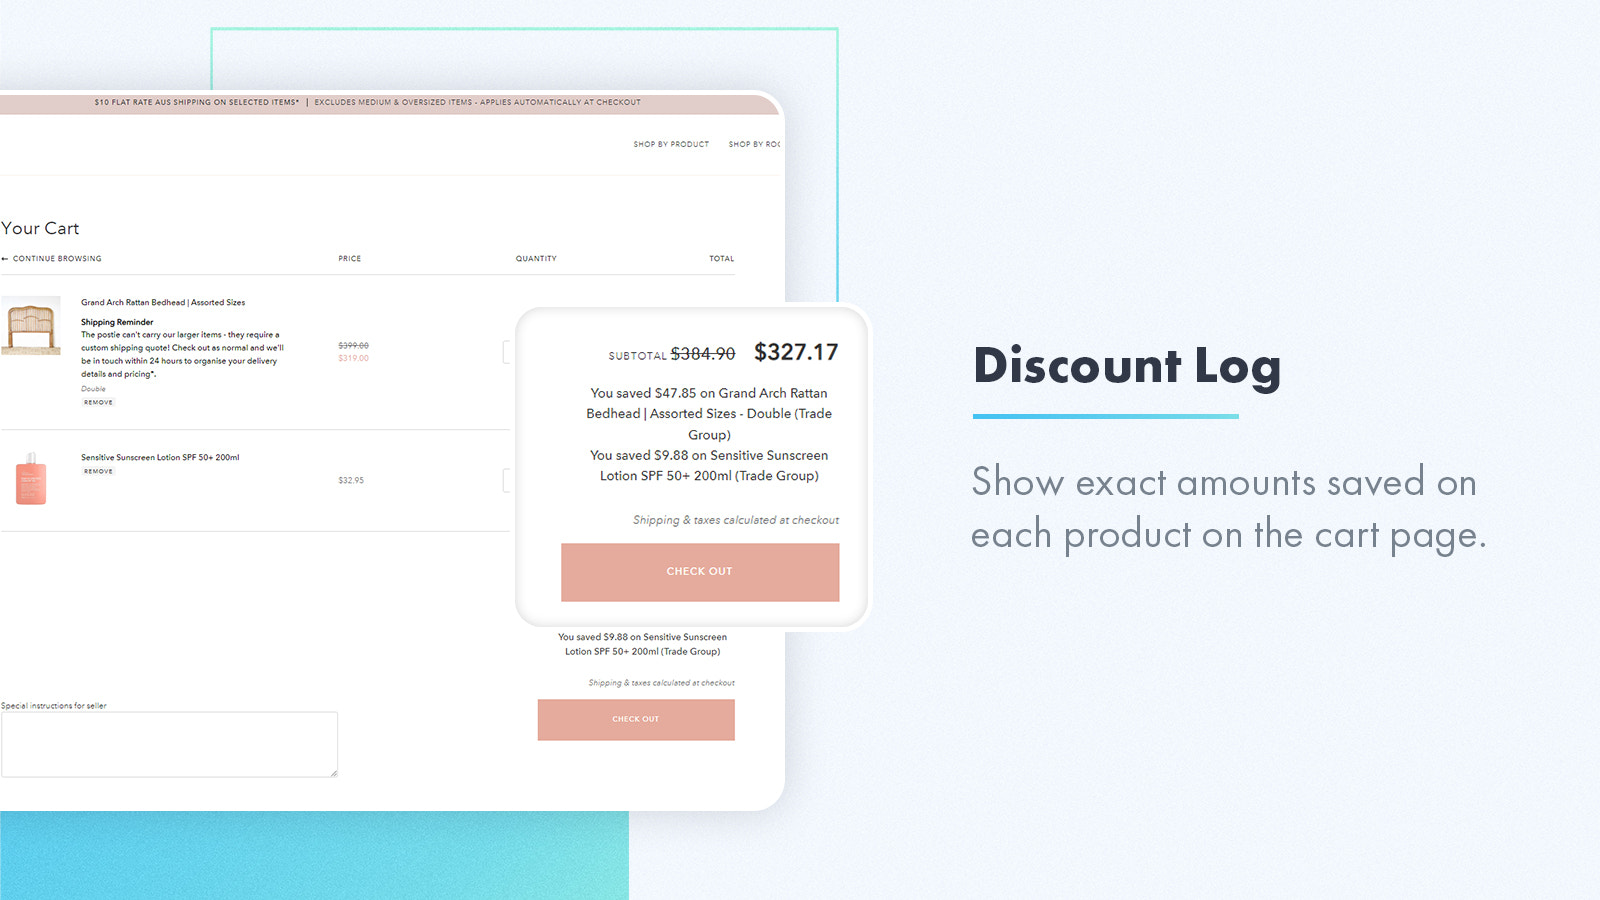 Automatically apply discounts like bonuses and breaks in cart